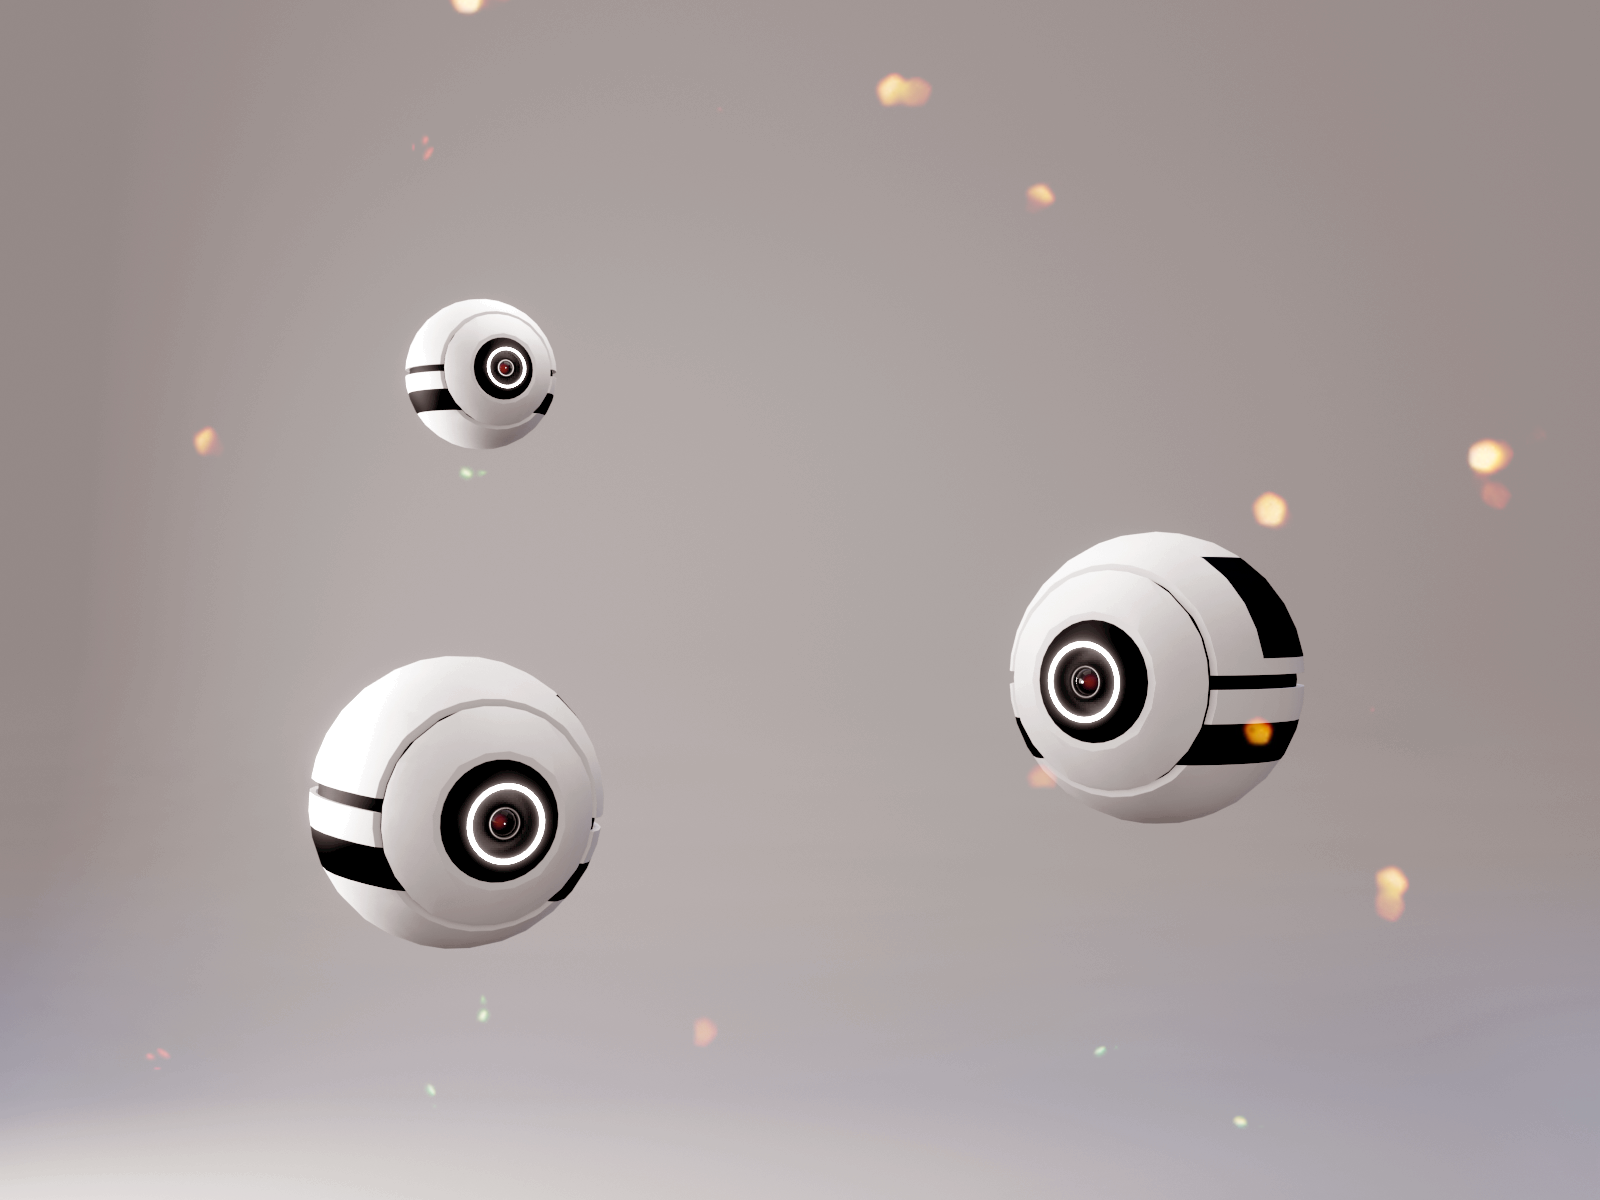 Sci-Fi Sphere Drones by Mihails Tumkins Dribbble